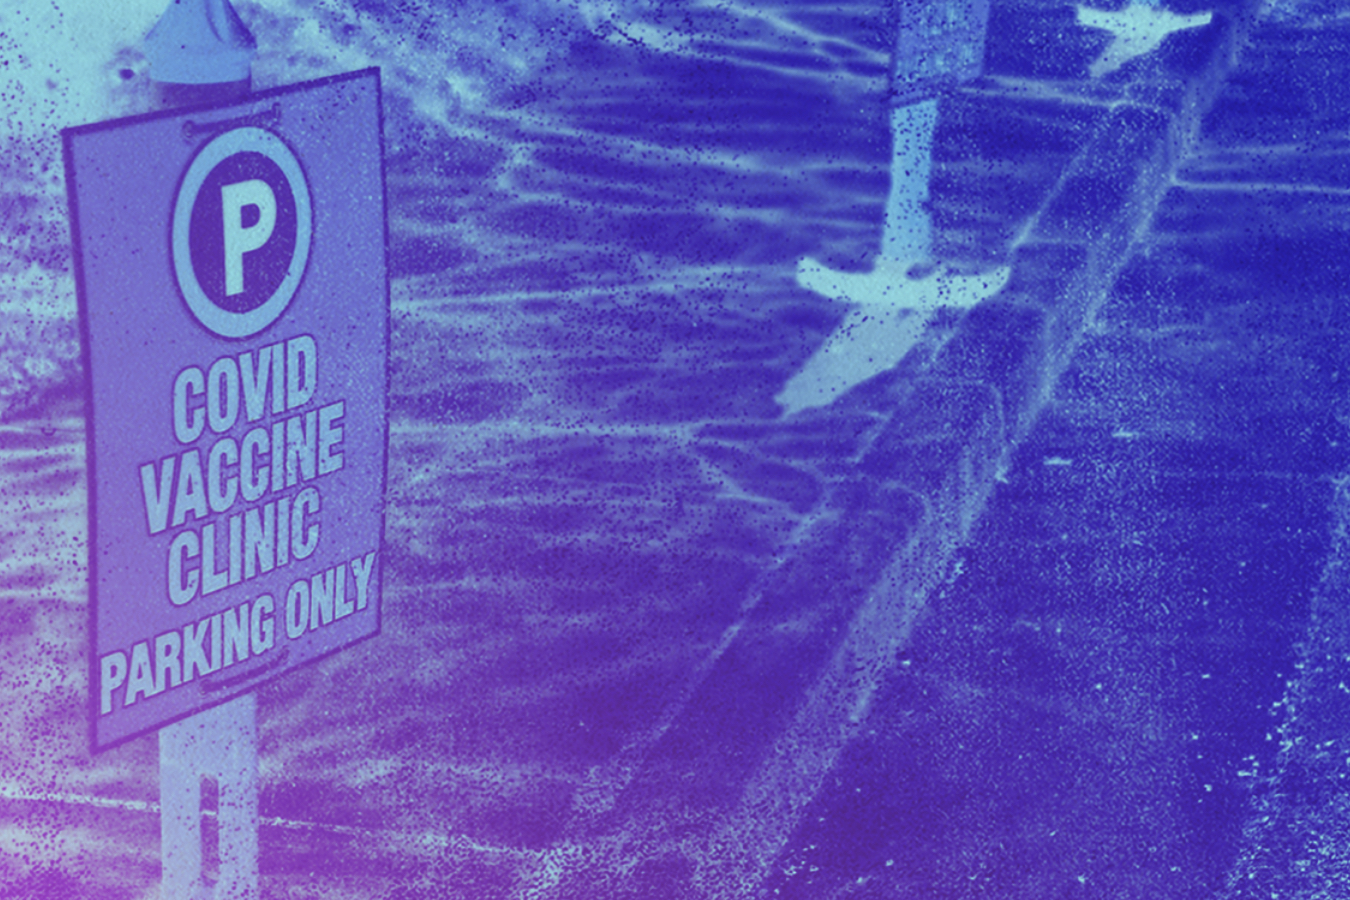 A photo illustration shows a parking lot displaying a covid-19 vaccine clinic parking spot. The image is tinted blue and purple and has a gritty texture overlaid on top.